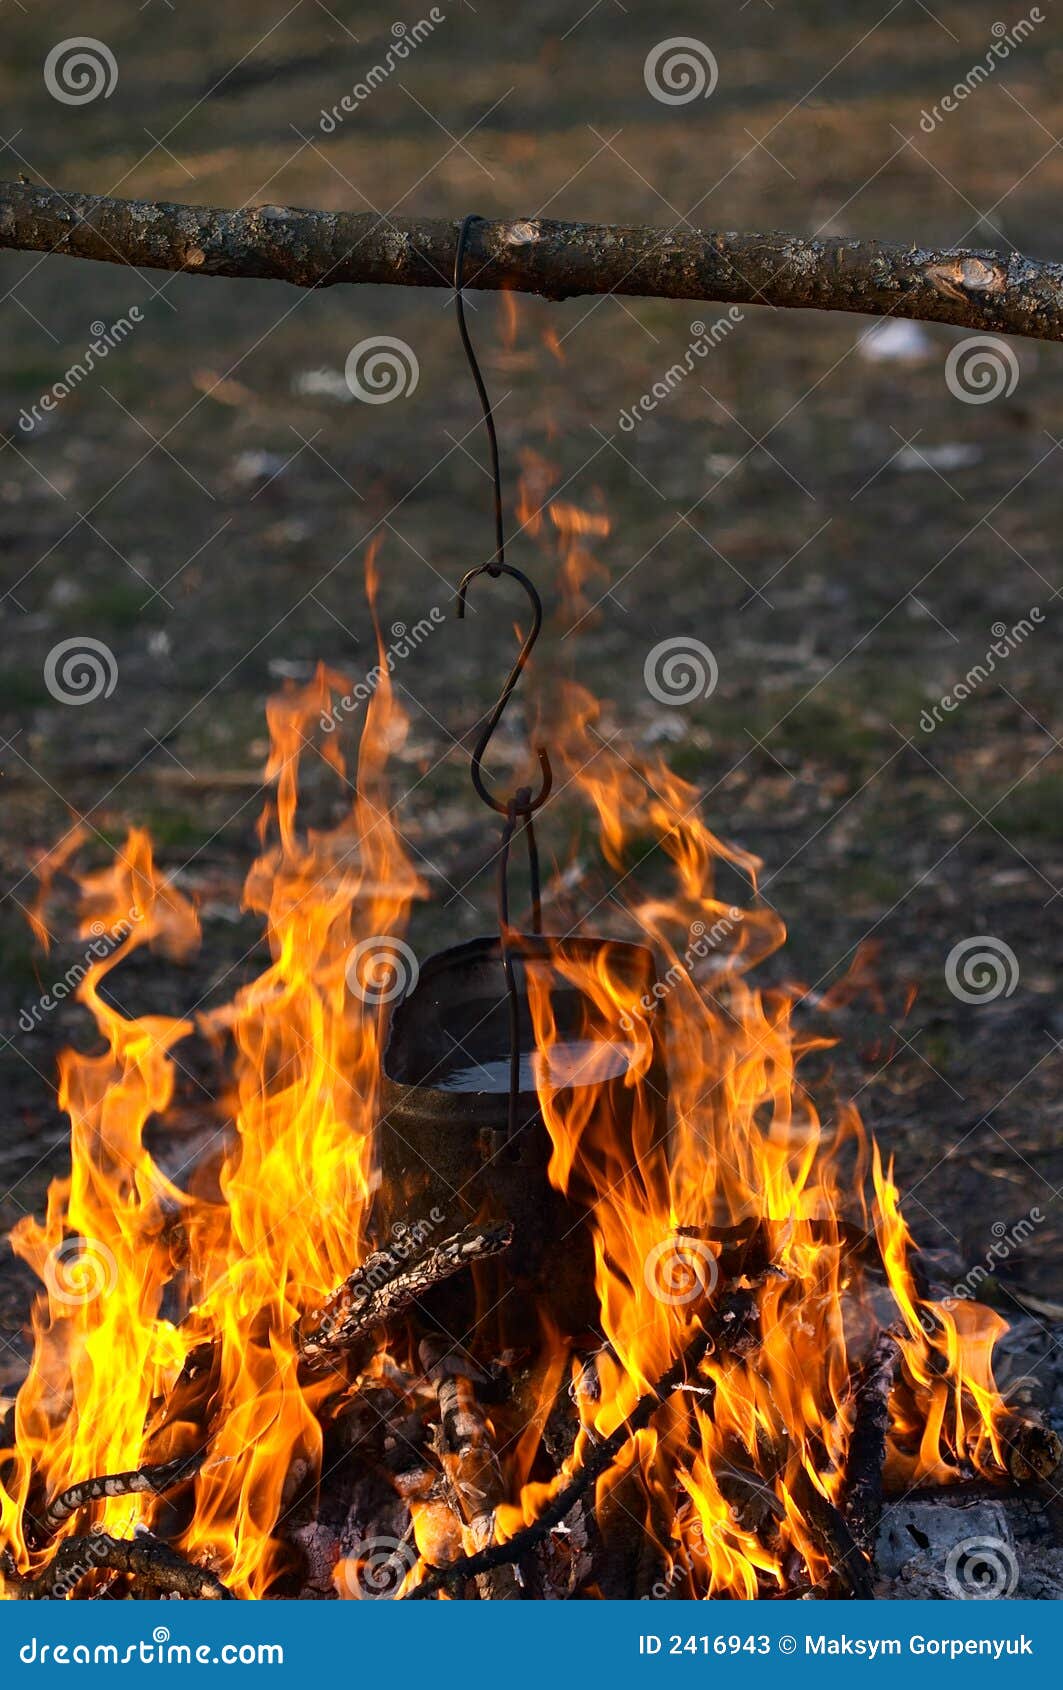 Kettle in the fire stock image. Image of explorer, camp - 2416943